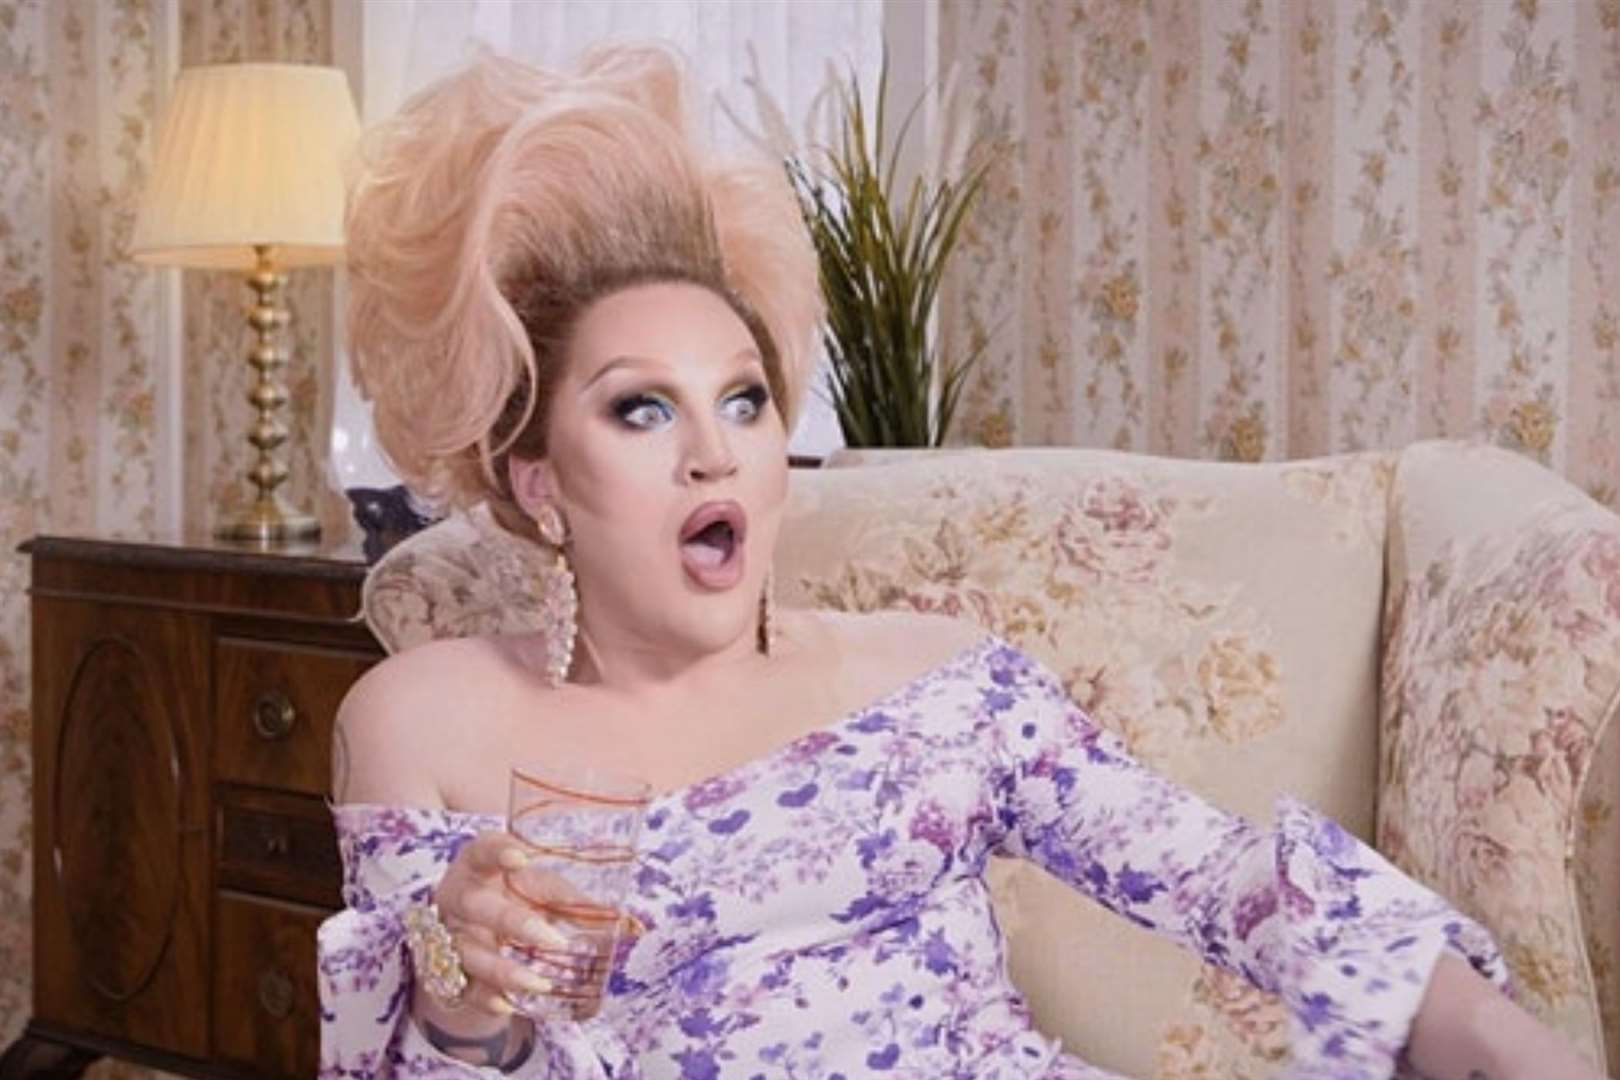 Drag race favourites will be in Margate next week